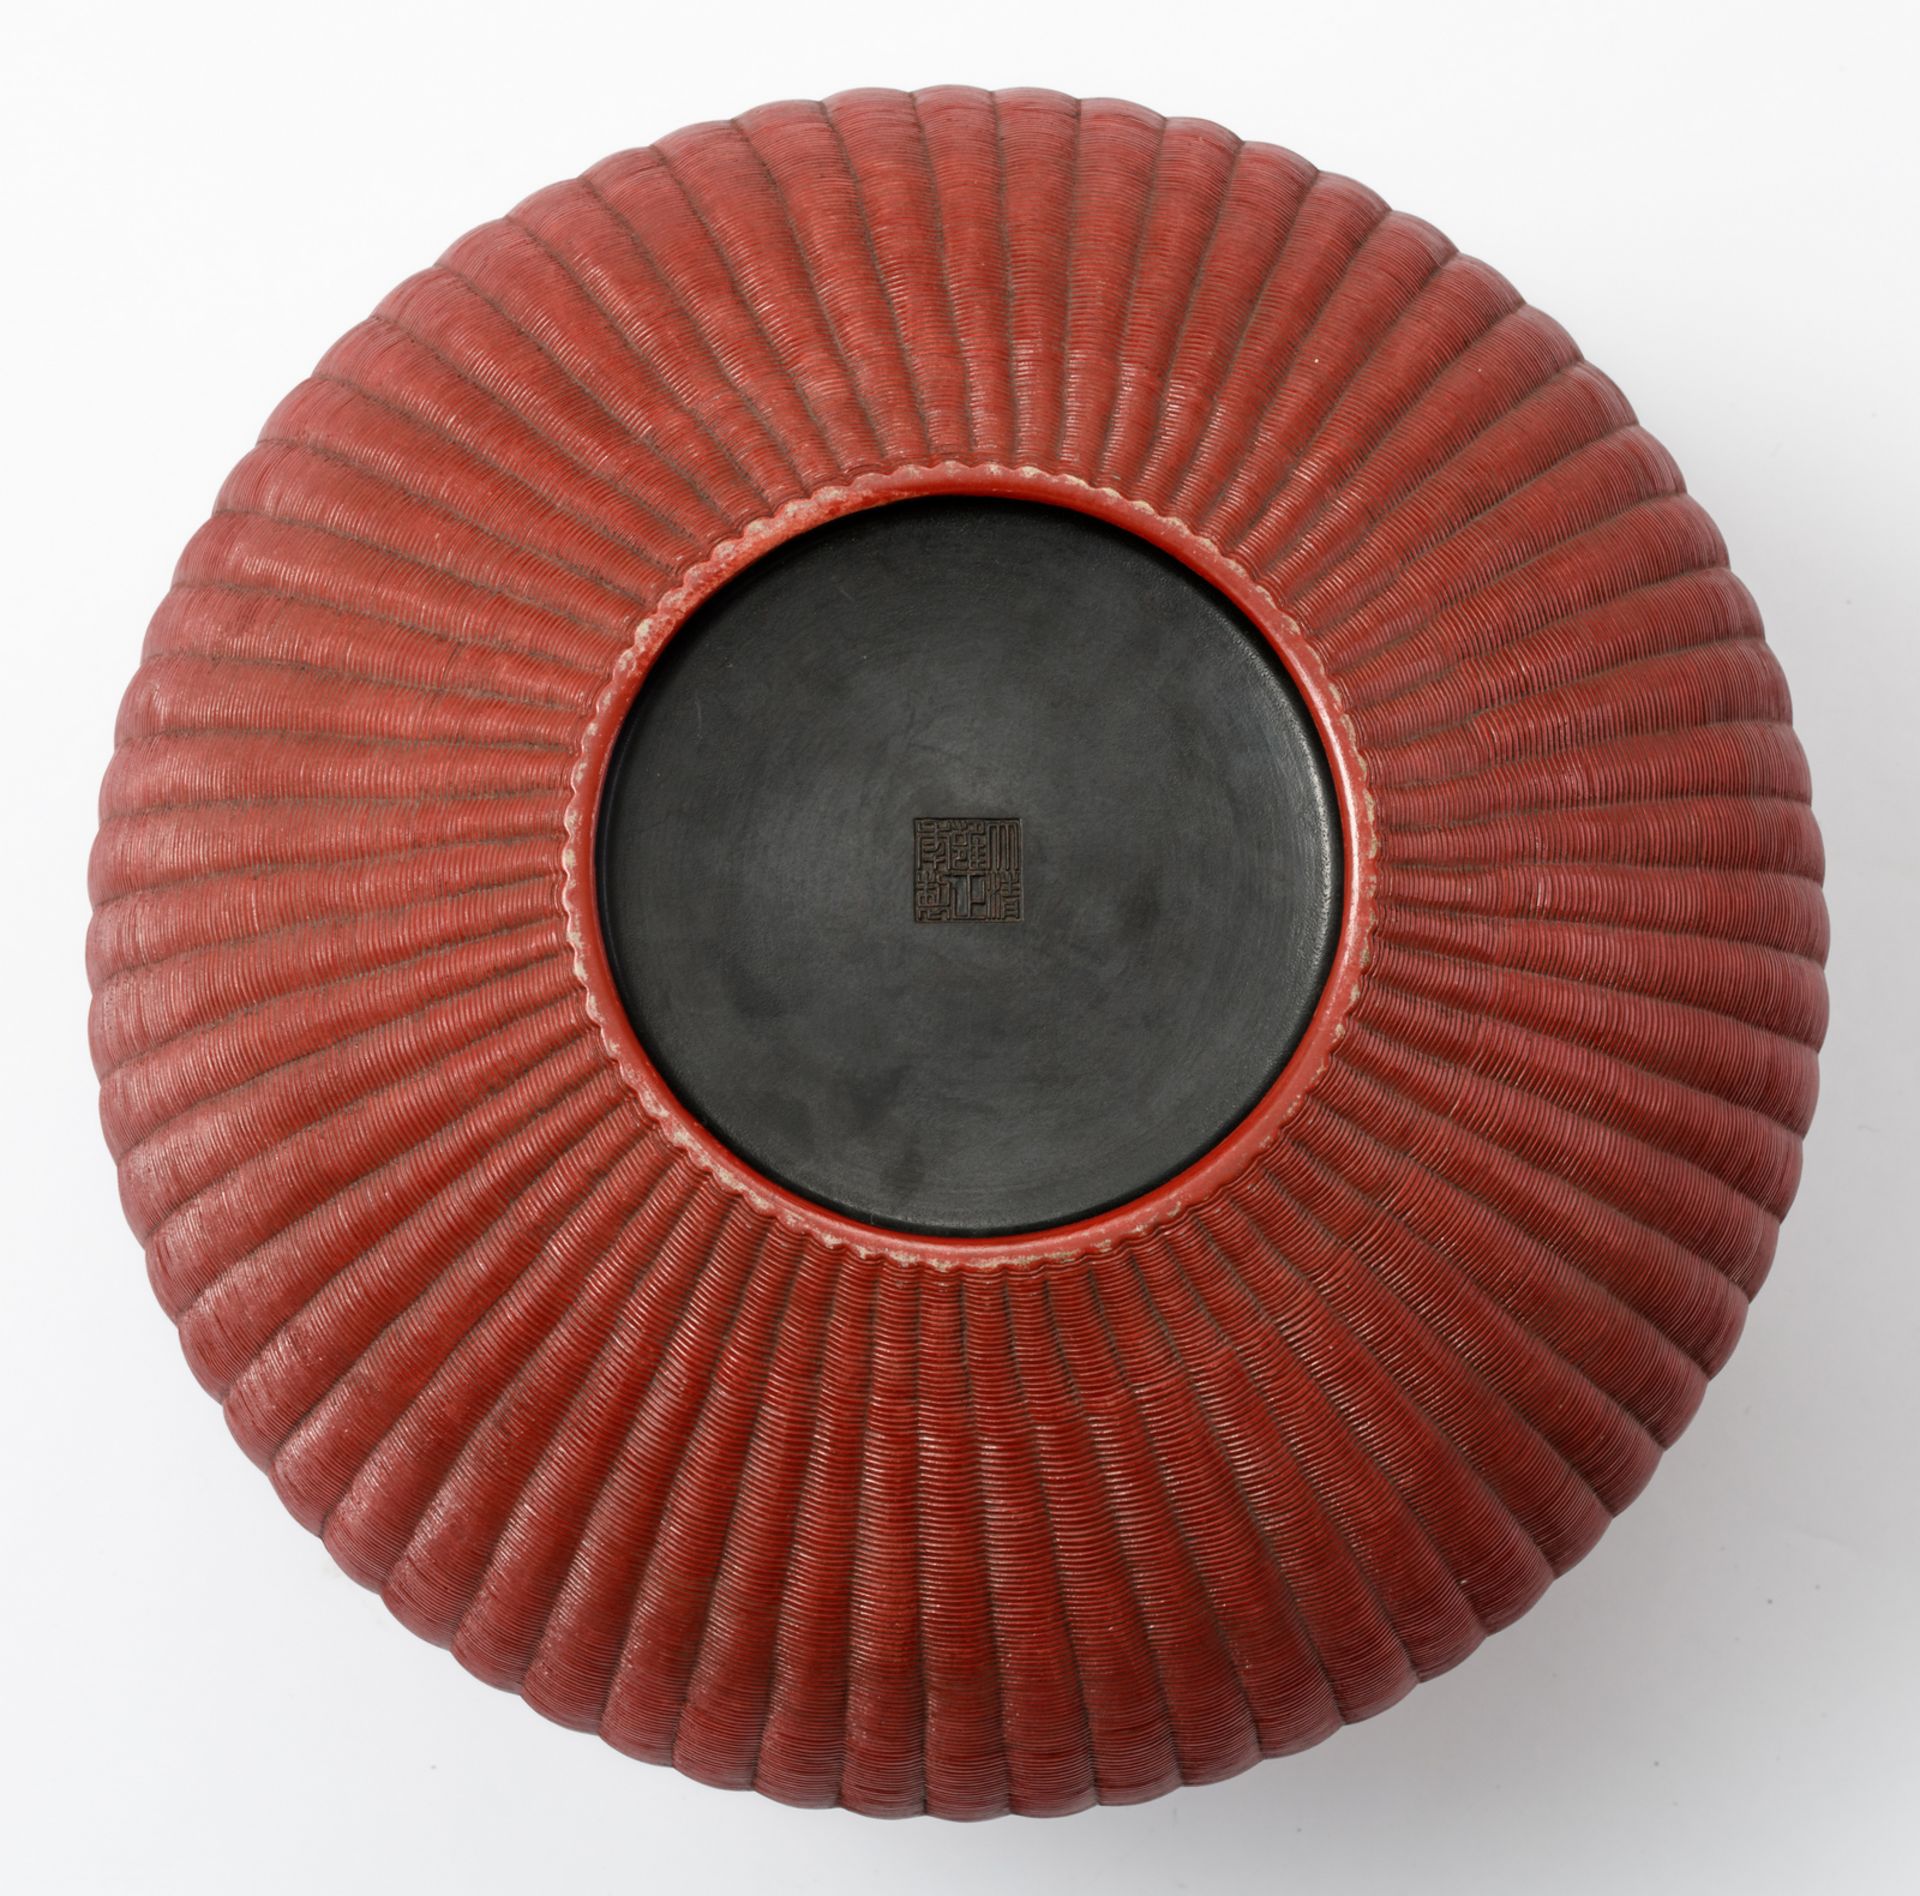 A fine Chinese red brown glazed reed basket shaped vase with a Yongzheng mark, H 40,5 cm - Image 7 of 7